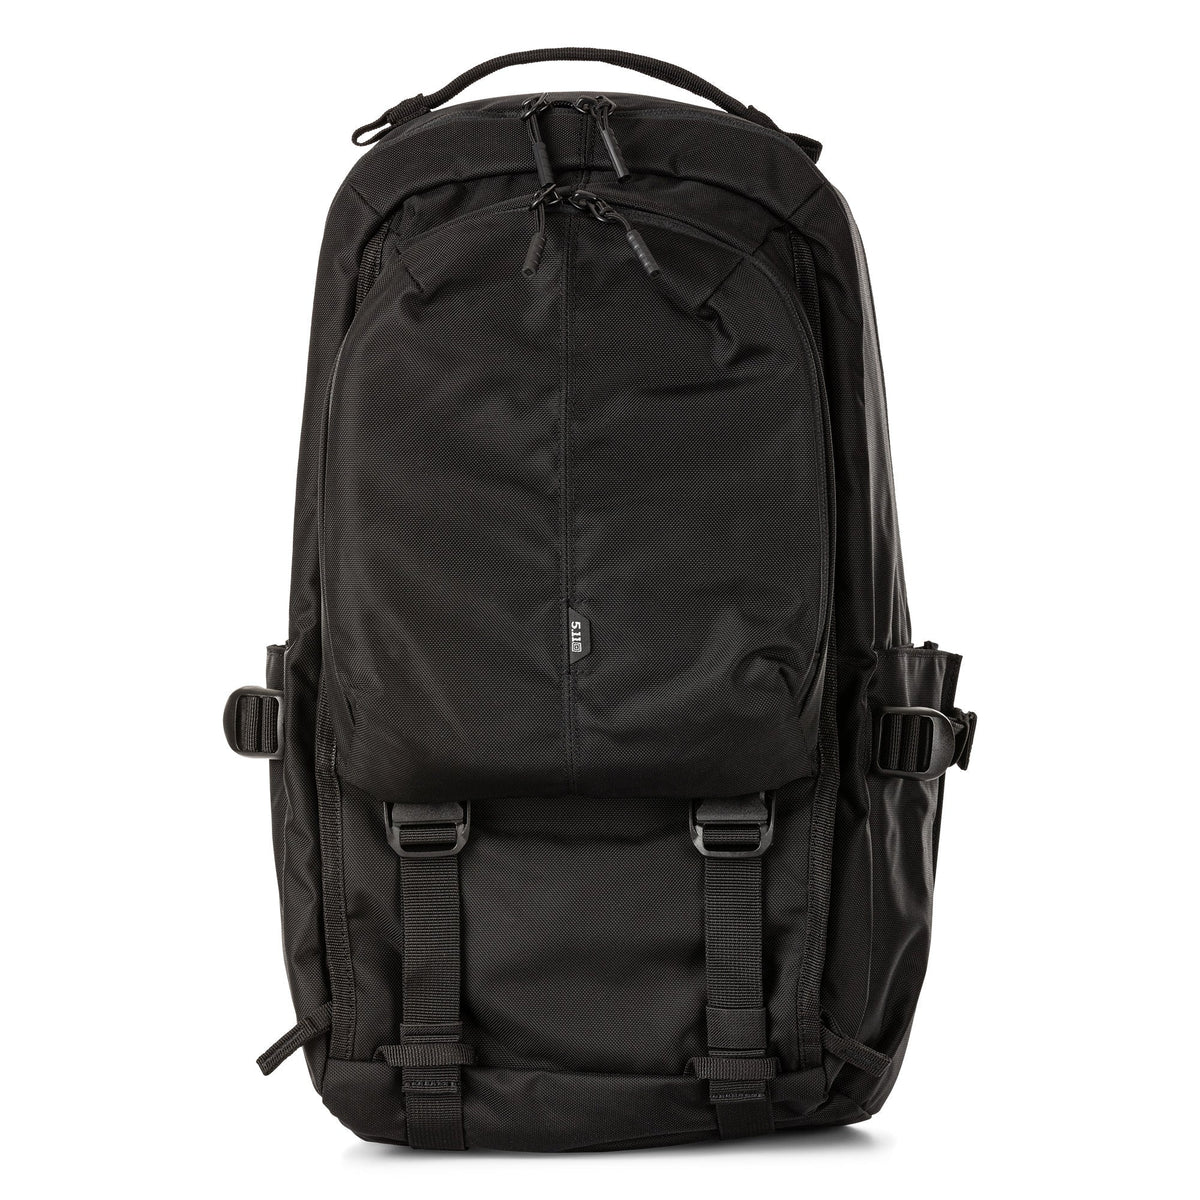 5.11 Tactical LV18 Backpack 2.0 30L Bags, Packs and Cases 5.11 Tactical Black Tactical Gear Supplier Tactical Distributors Australia